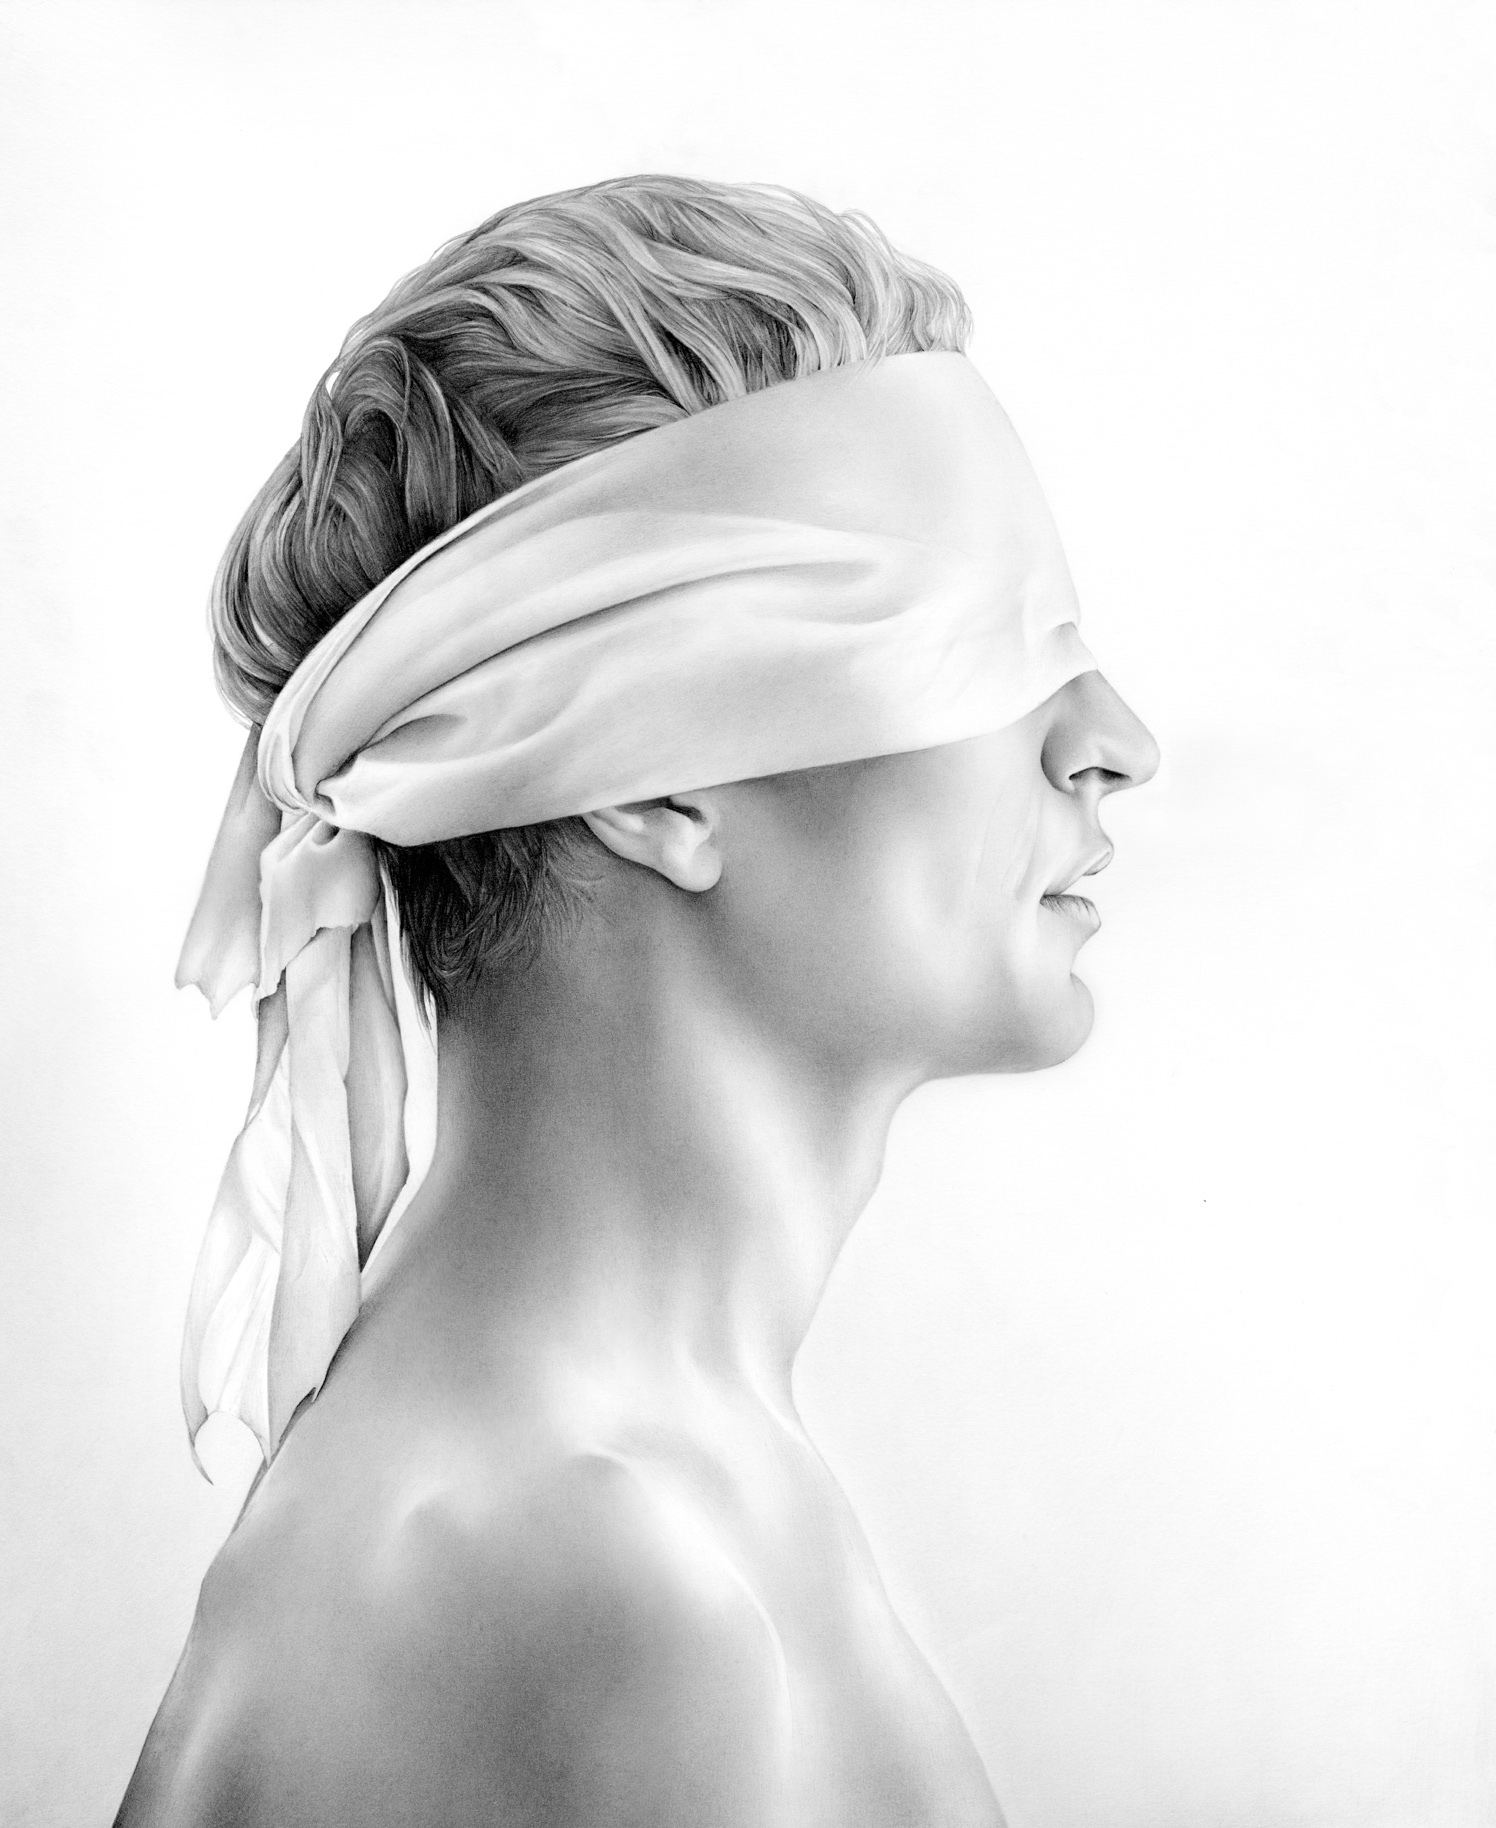 Blindfolded Man In Profile / Cath Riley - Projects - Debut Art